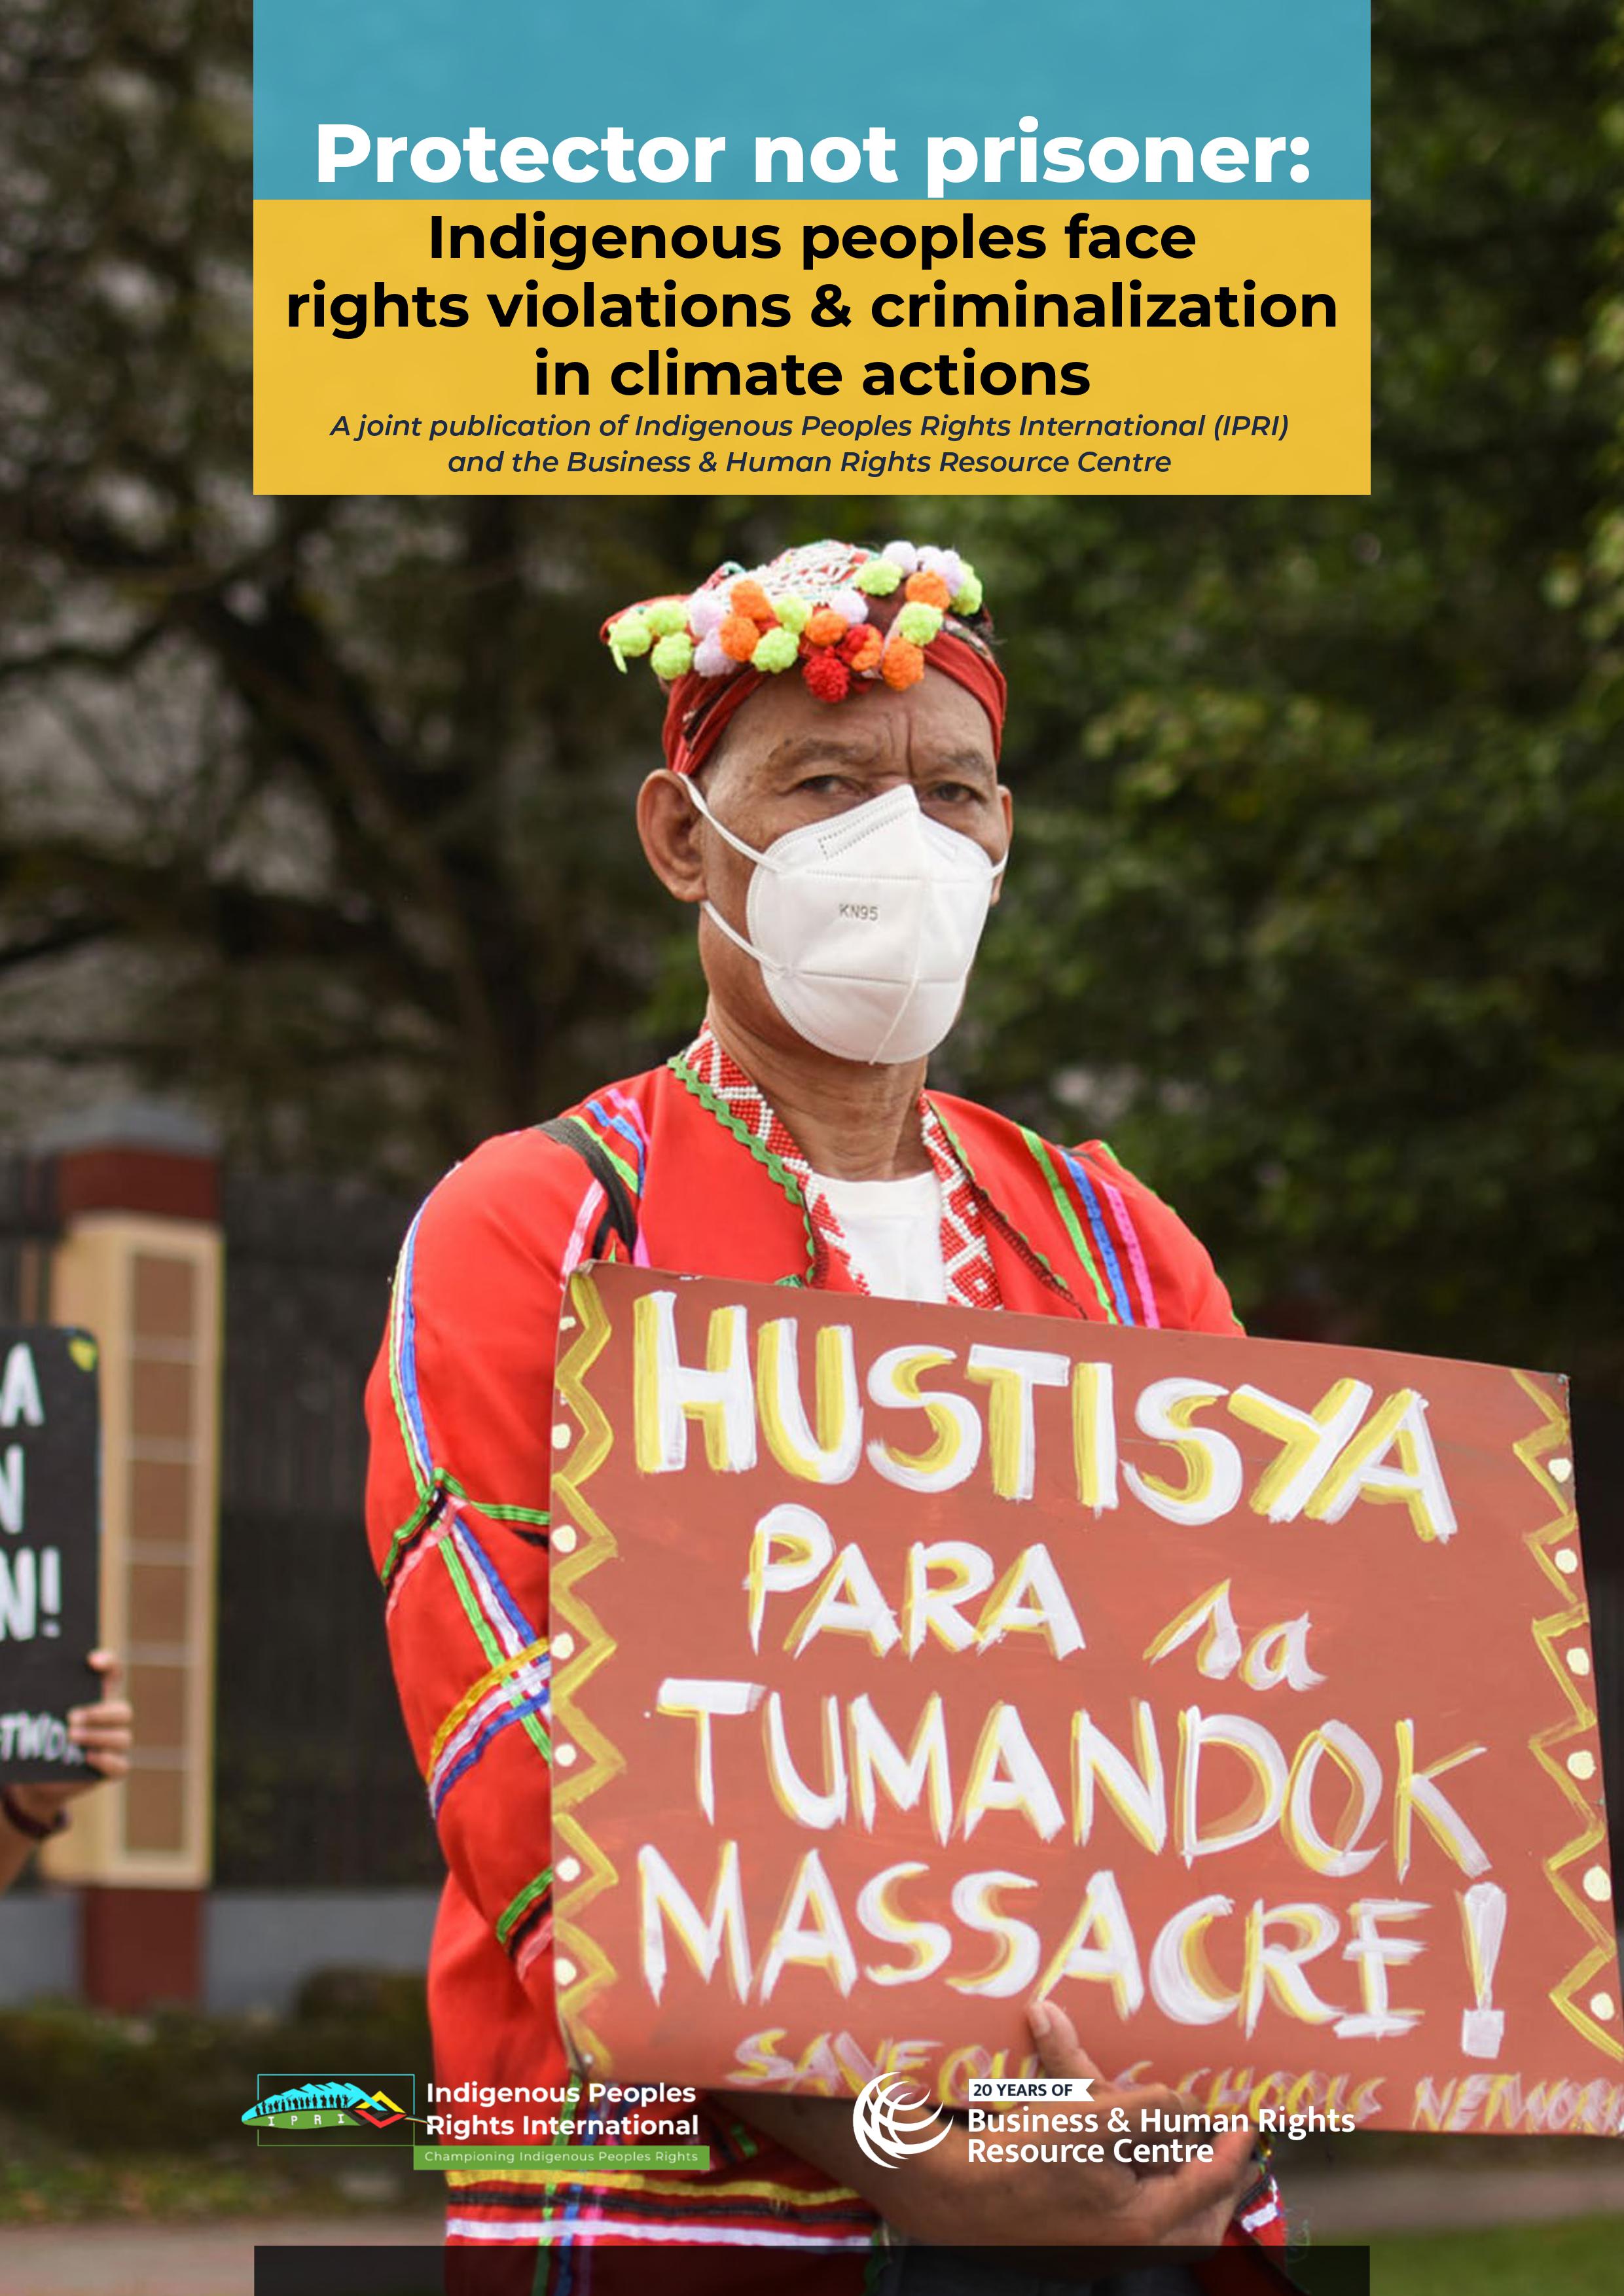 Annual Report: Criminalization of, Violence, and Impunity against Indigenous Peoples